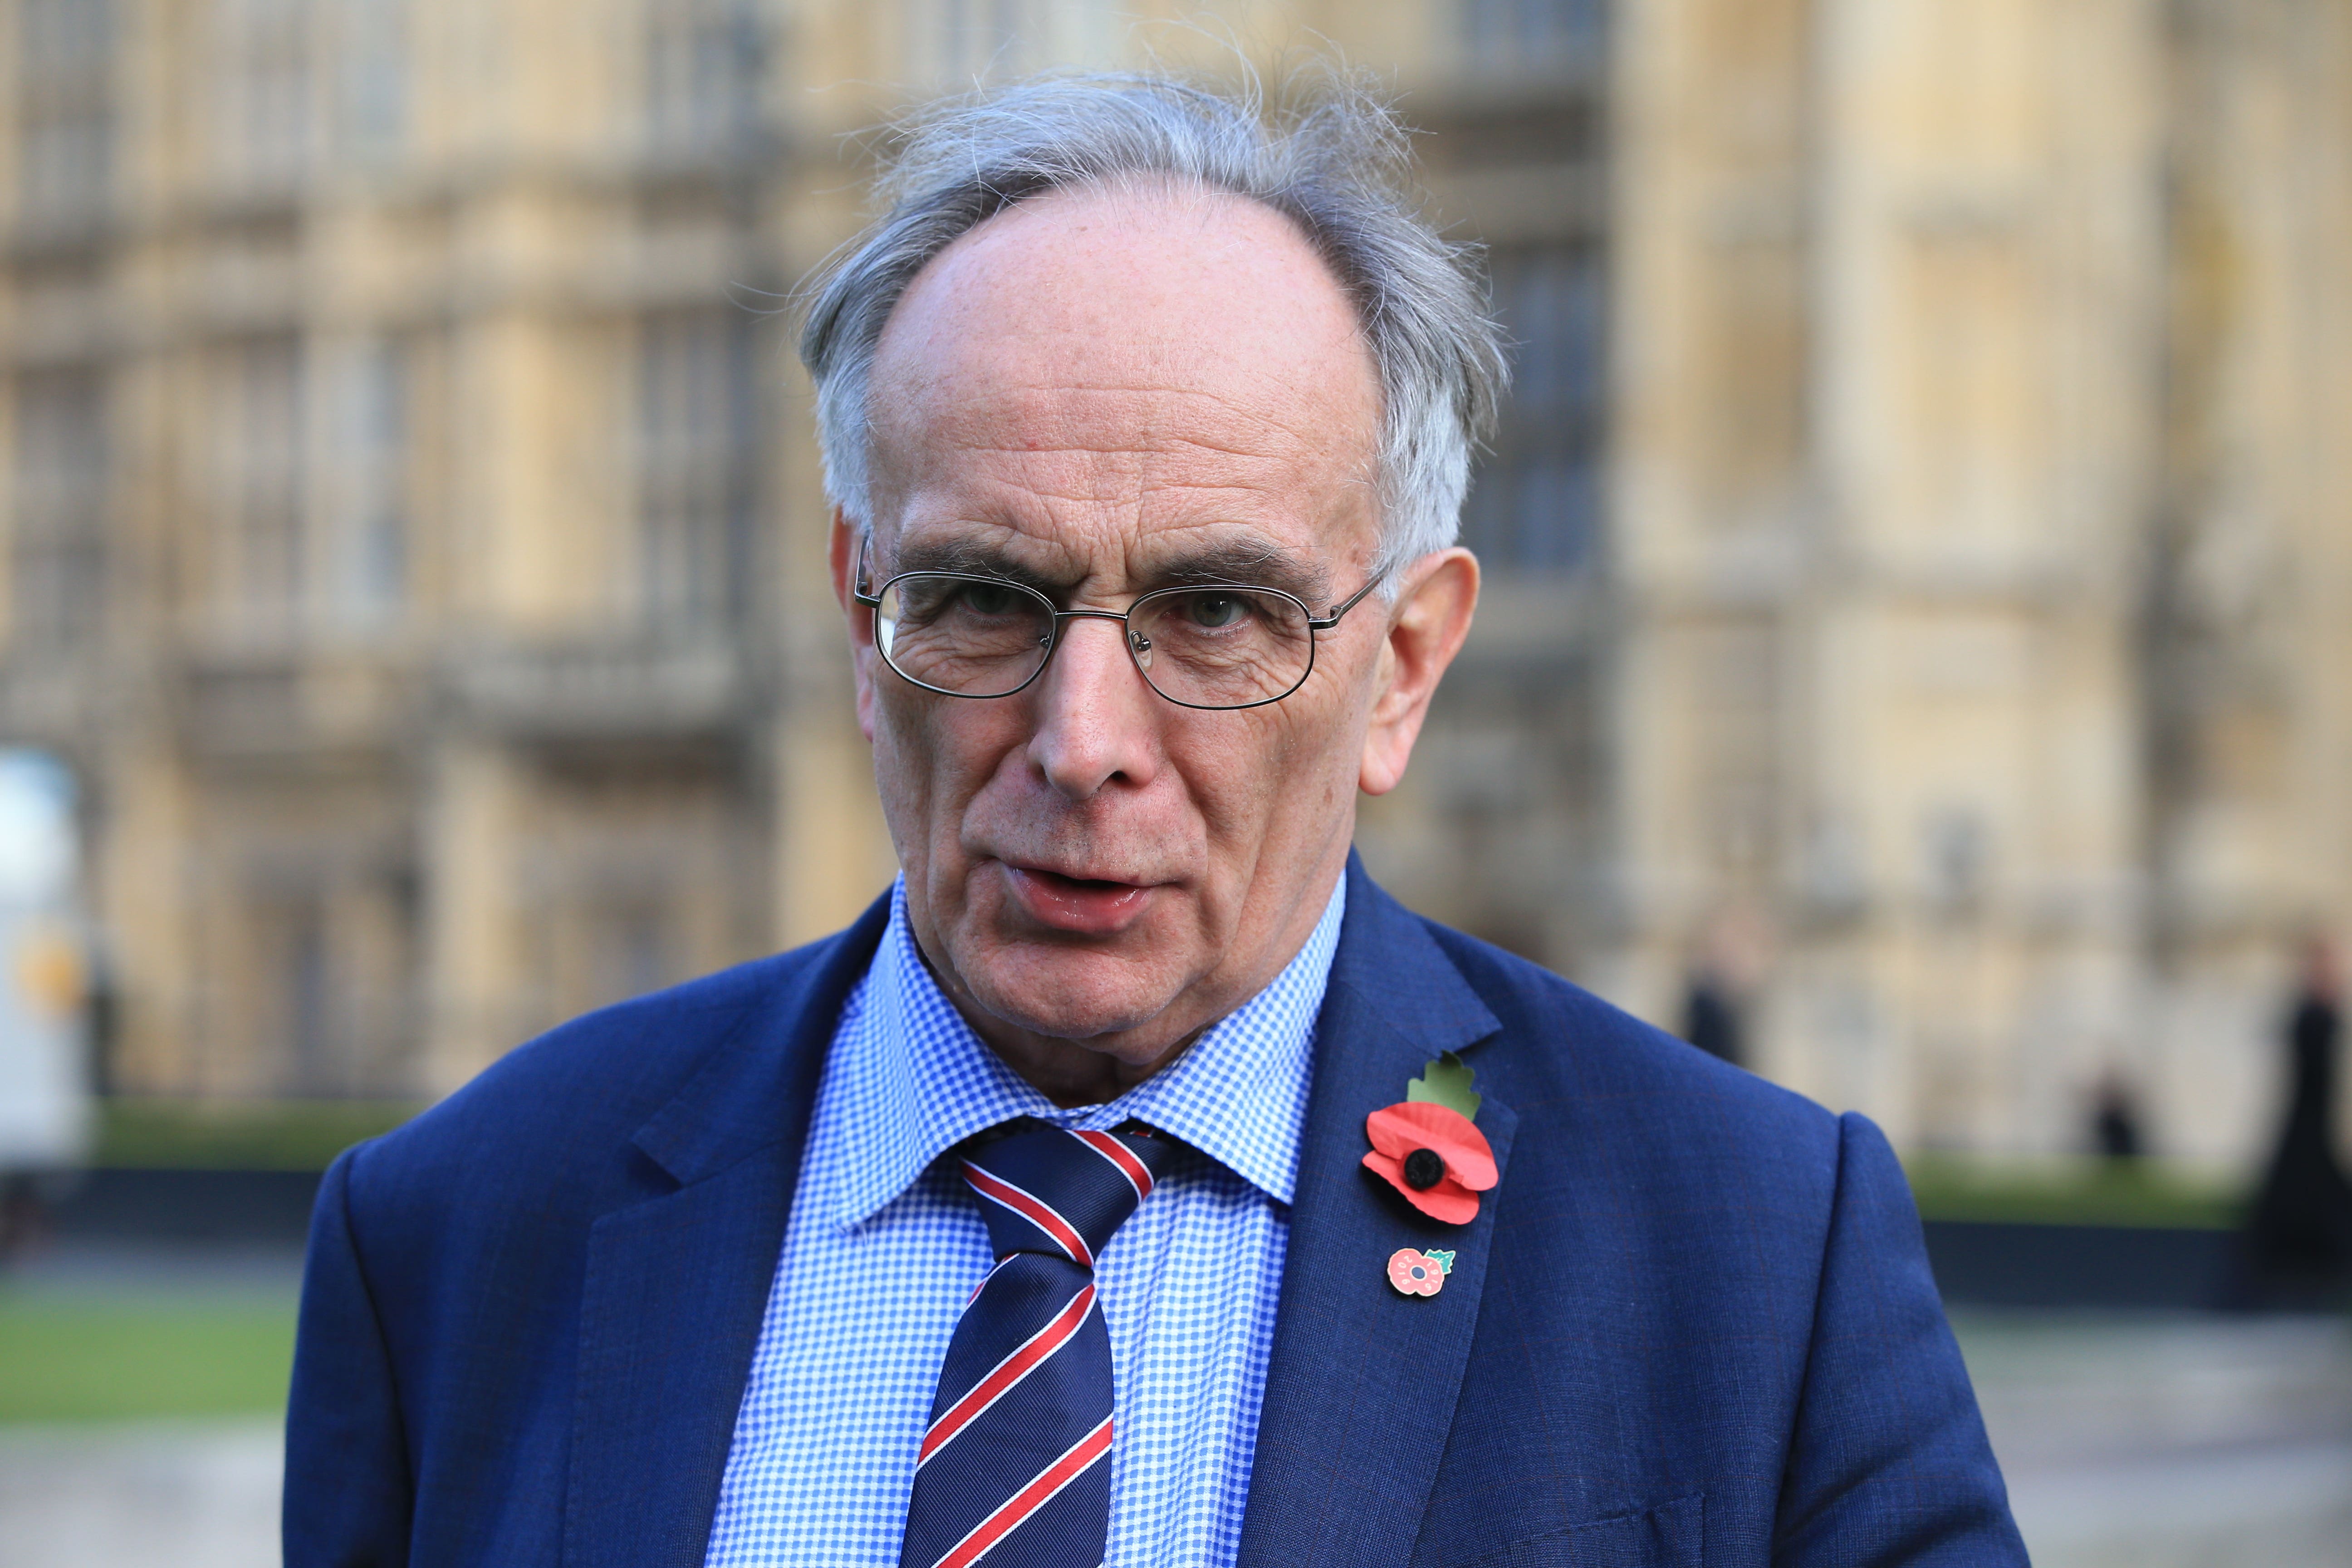 Wellingborough MP Peter Bone held his seat in 2019 with a majority of more than 18,000